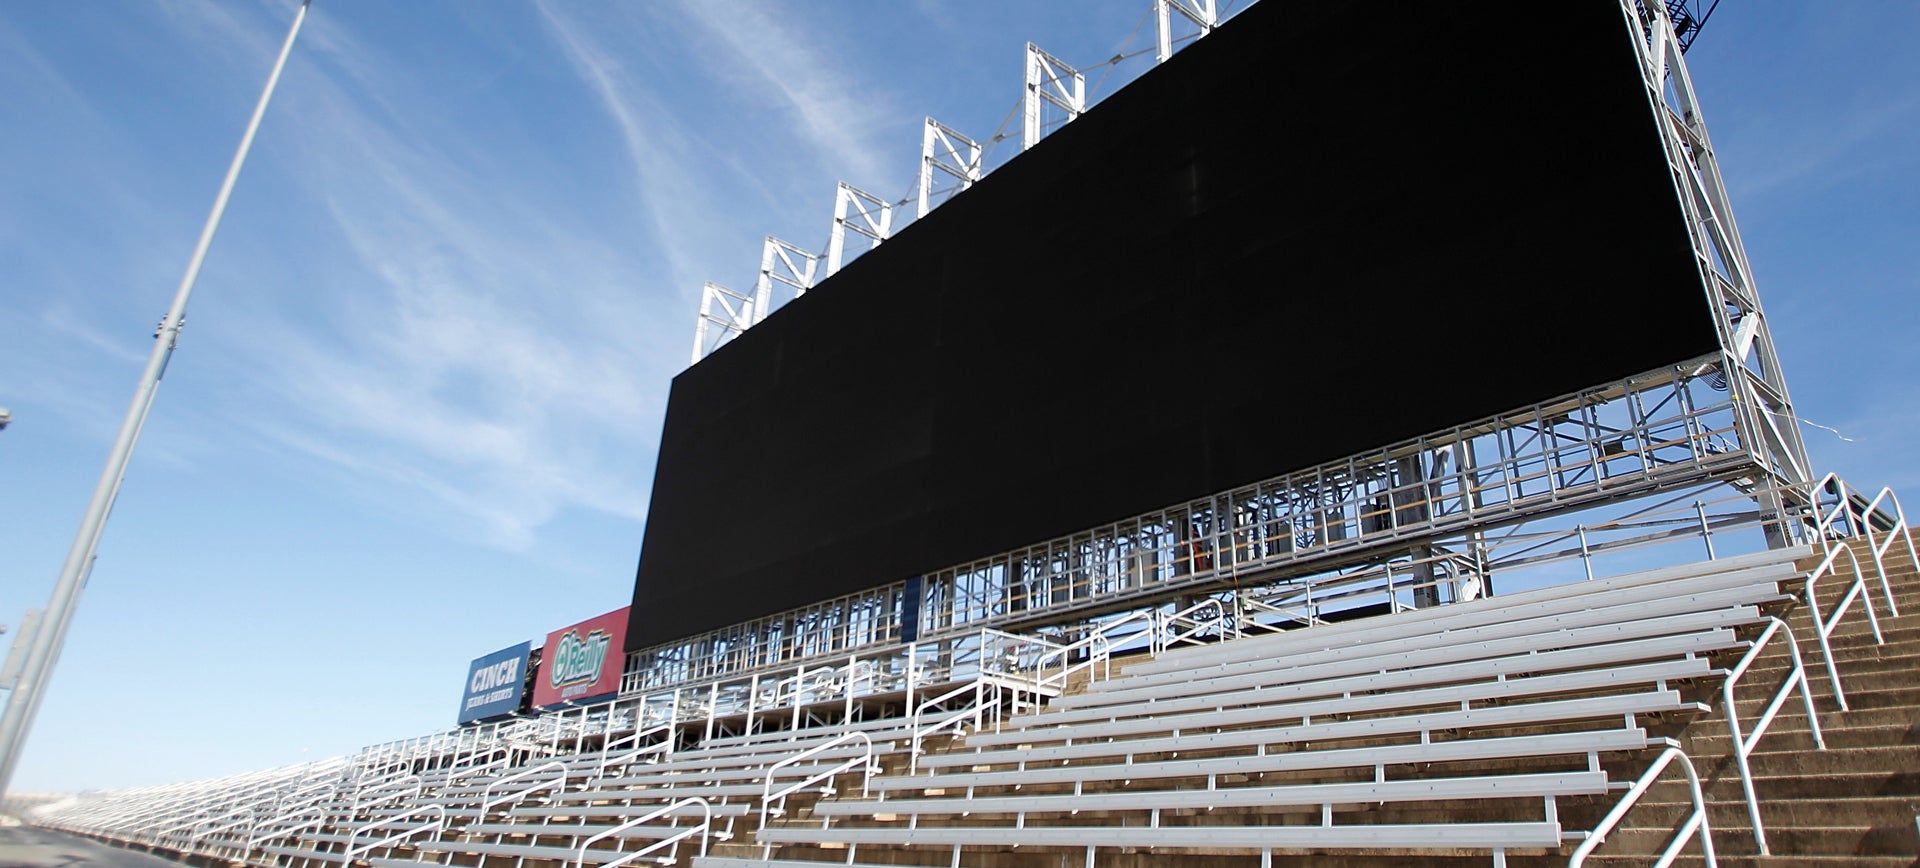 World&#39;s Largest HDTV Opens At Texas Motor Speedway, Could Fit 9 Alamos